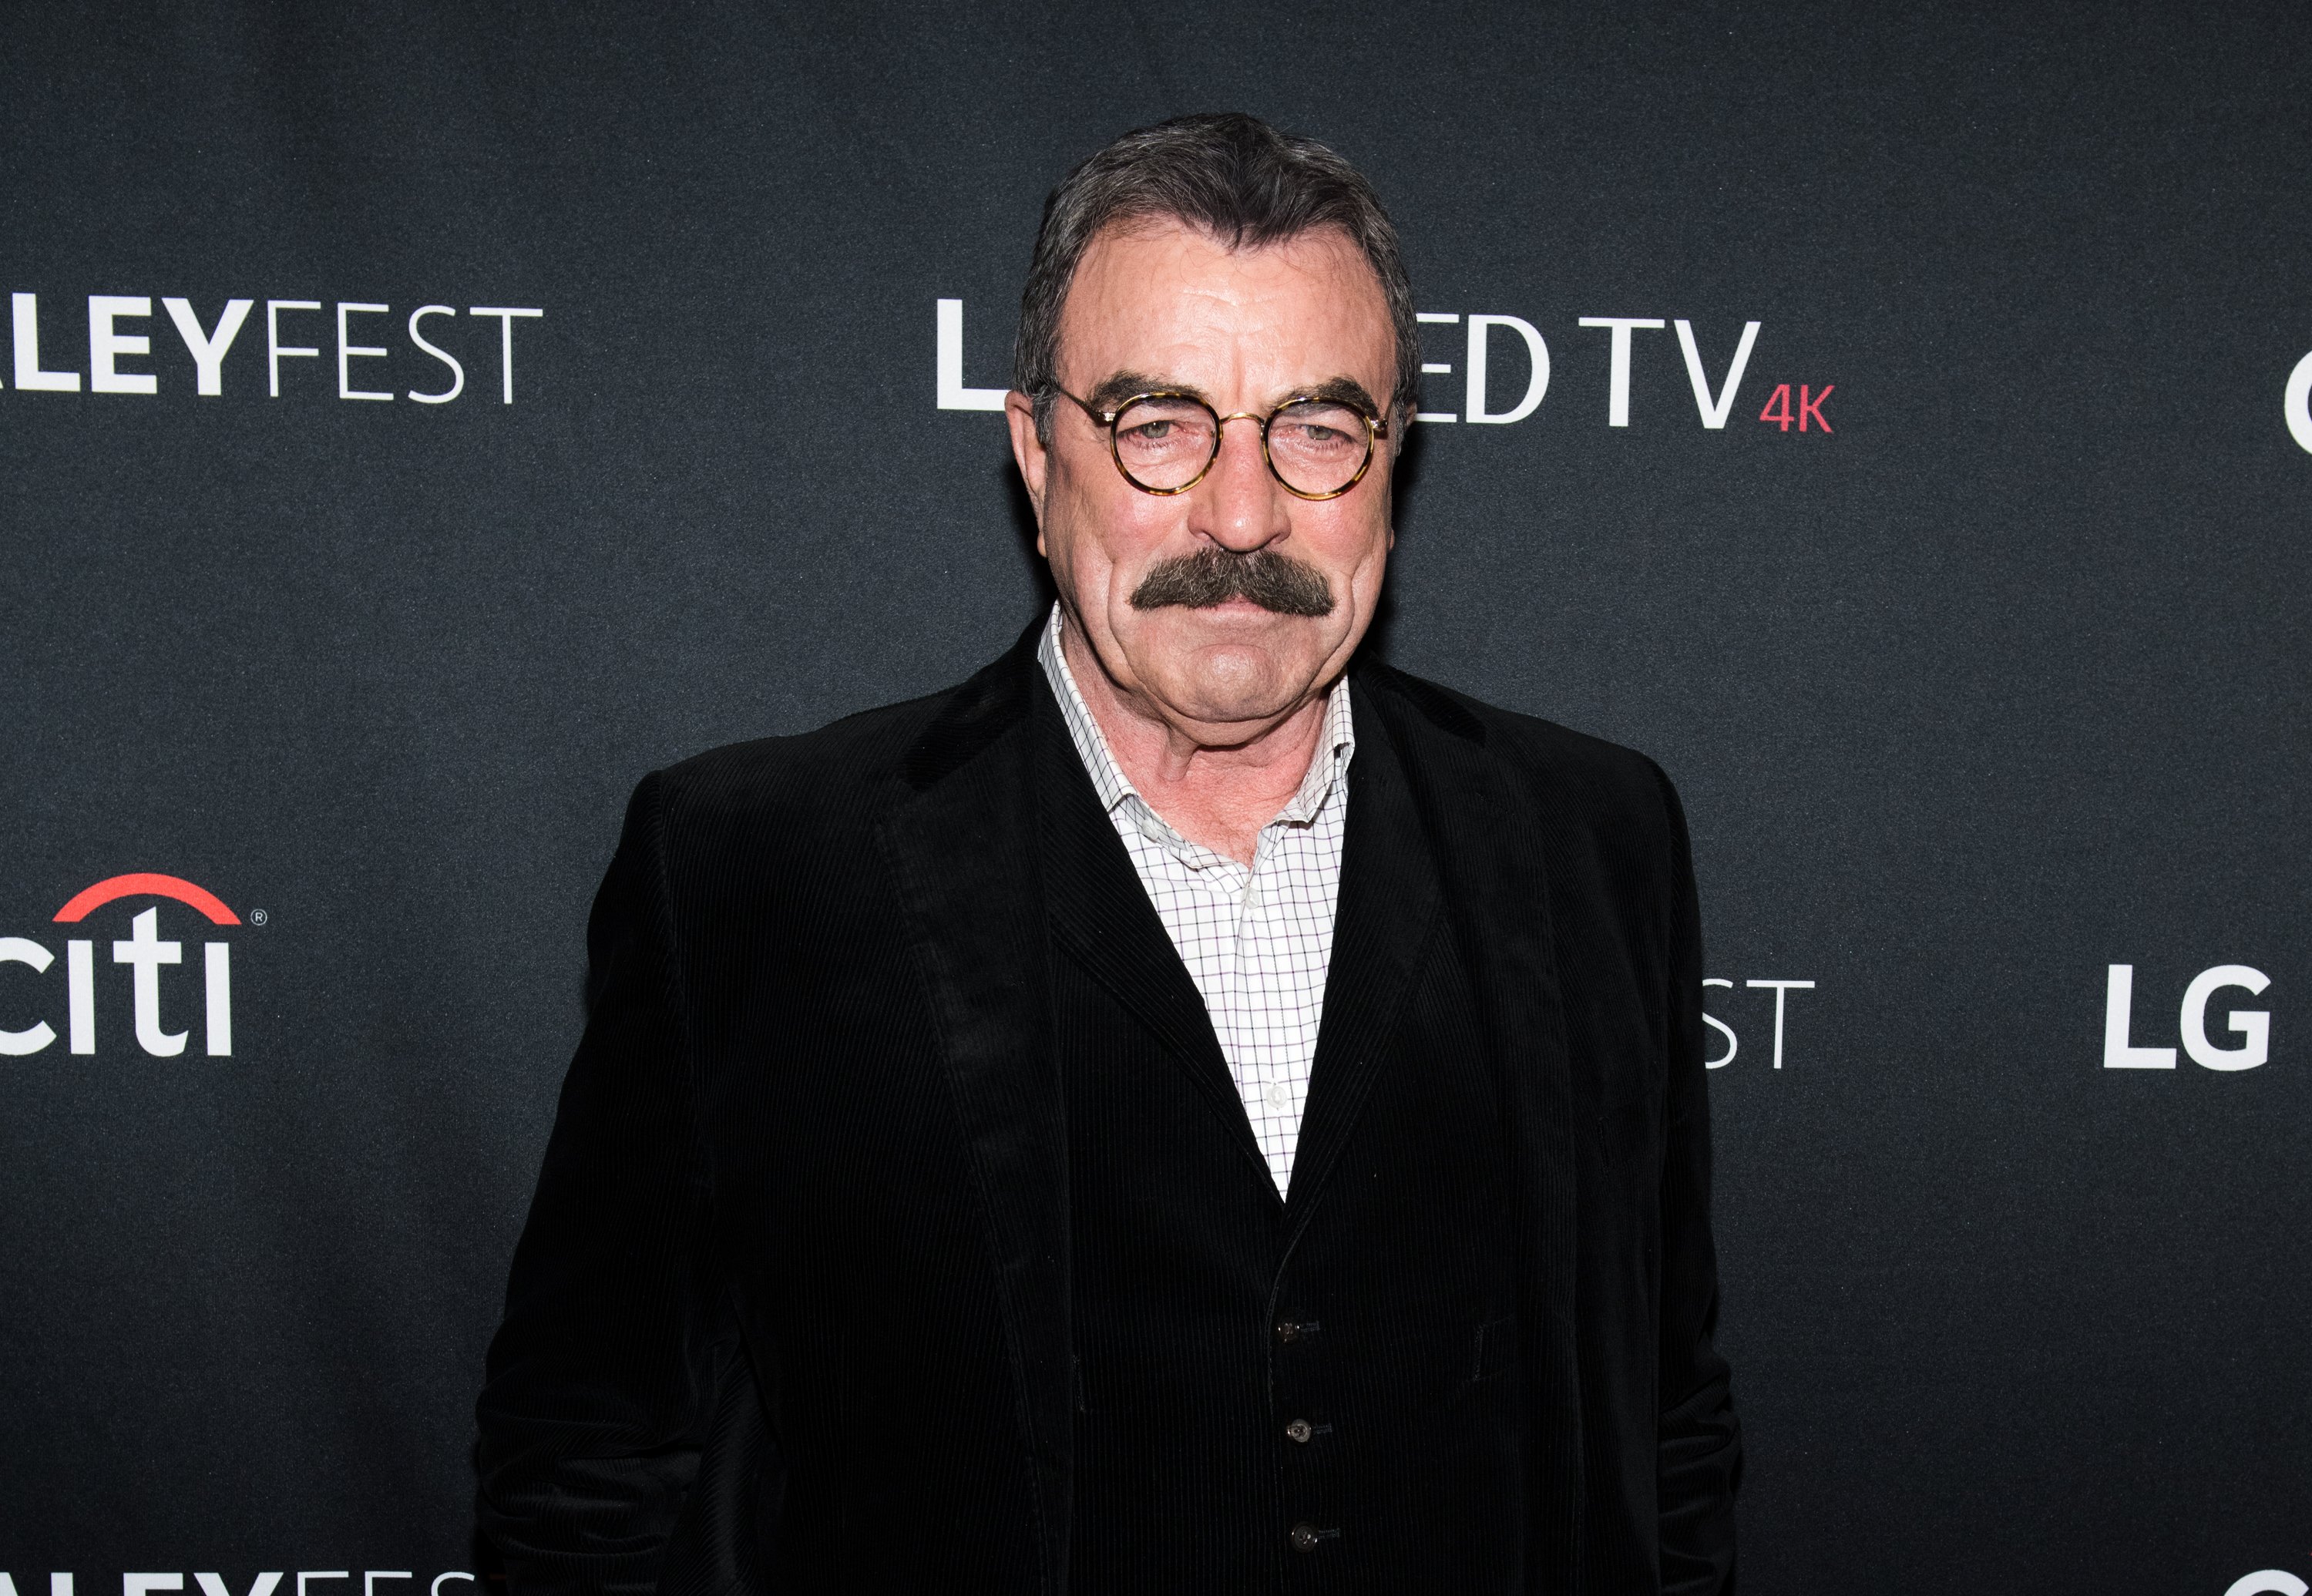 Tom Selleck attends the "Blue Bloods" screening during PaleyFest NY 2017 on October 16, 2017 in New York City. | Photo: Getty Images